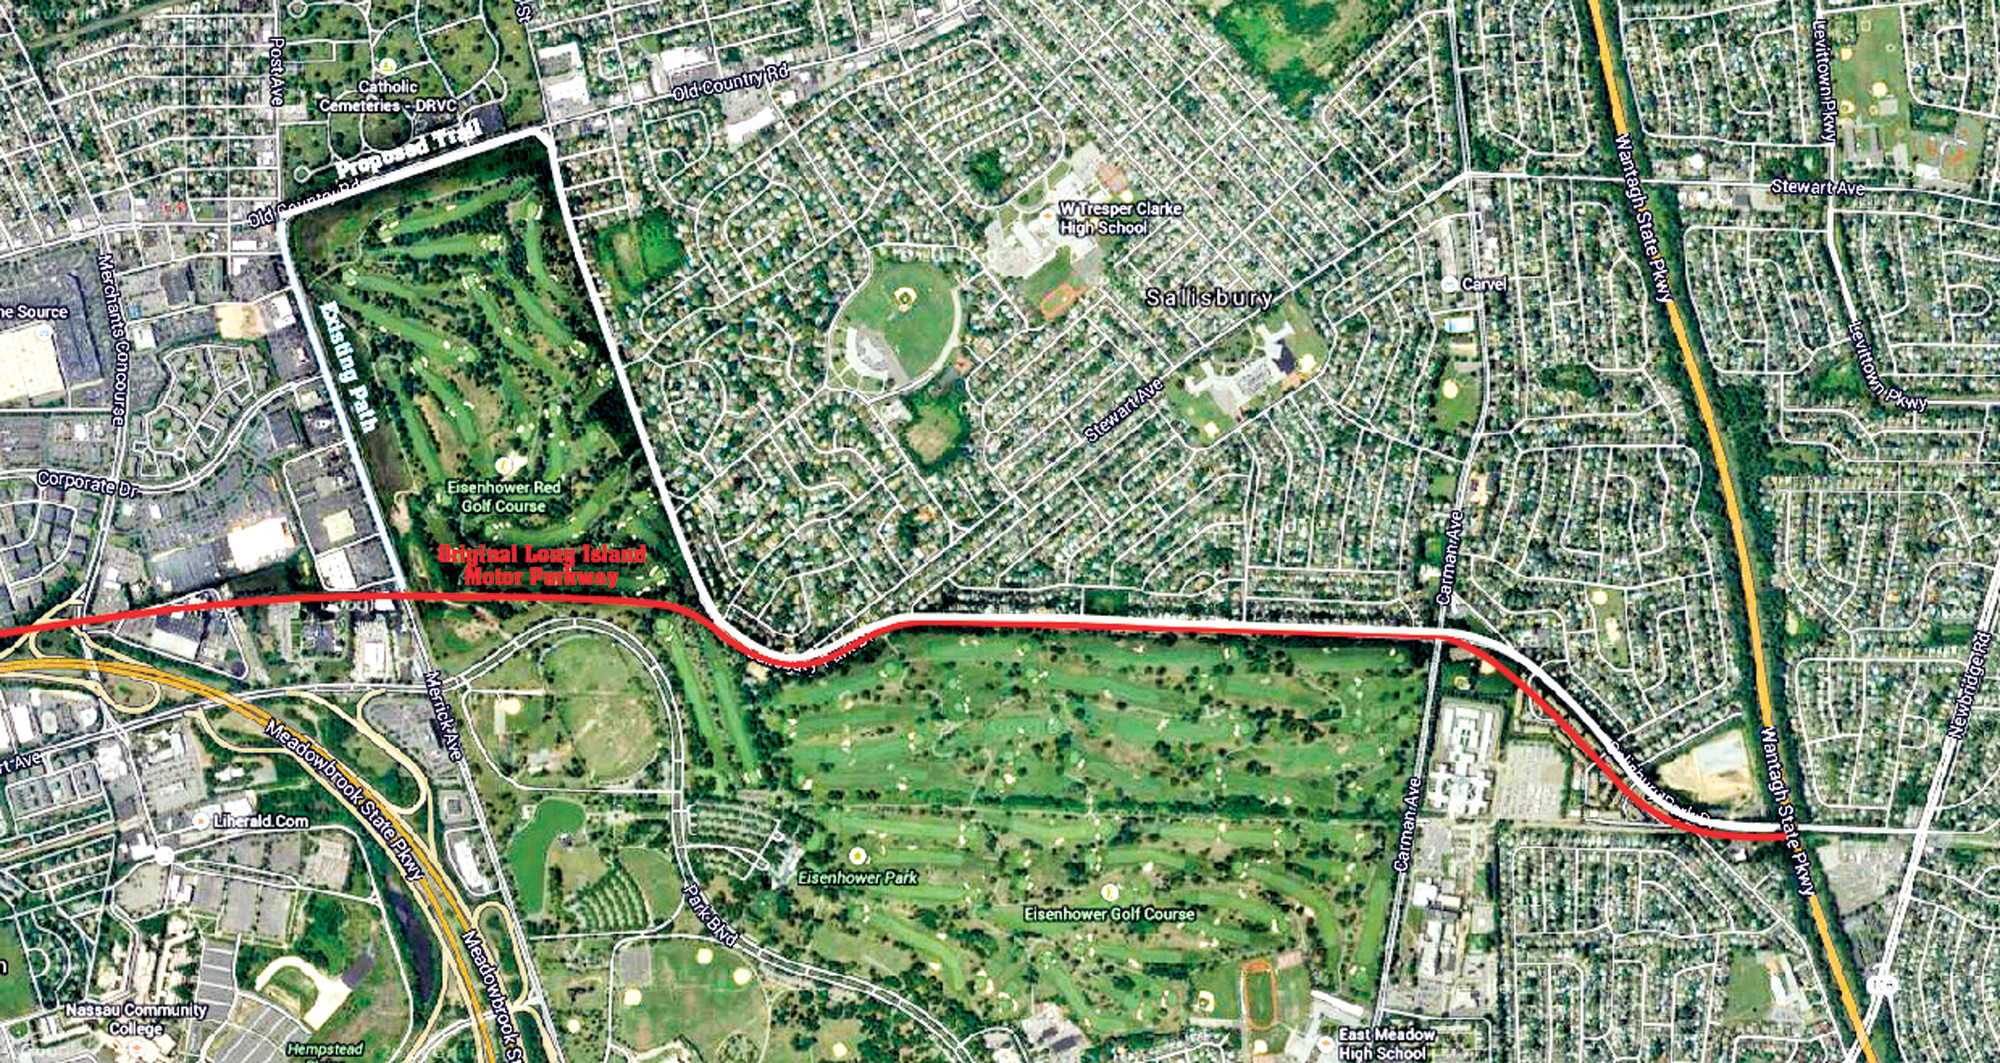 The proposed trail will closely follow the historic Long Island Motor Parkway along Salisbury Park Drive, circling around Eisenhower Park and continuing southeast towards the Wantagh Parkway.